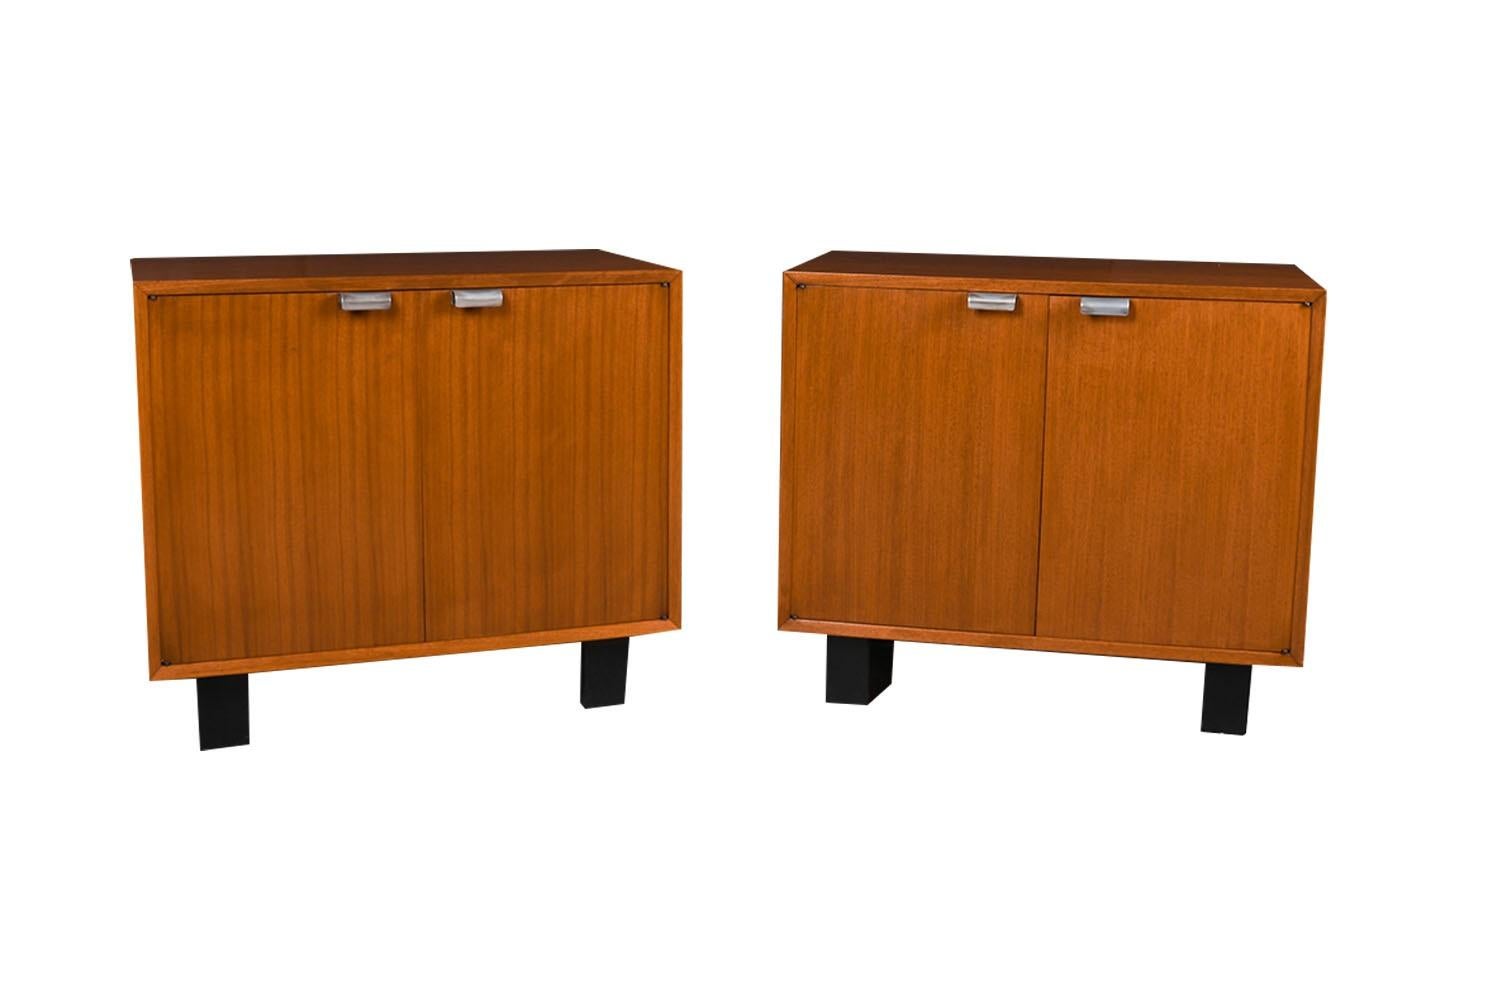 Remarkably Iconic rare pair of double door cabinets designed by George Nelson for the Herman Miller, Primavera line circa 1950s. Iconic piece resulting from the collaboration of these two MCM Masters! Often referred to as the Primavera Line, part of